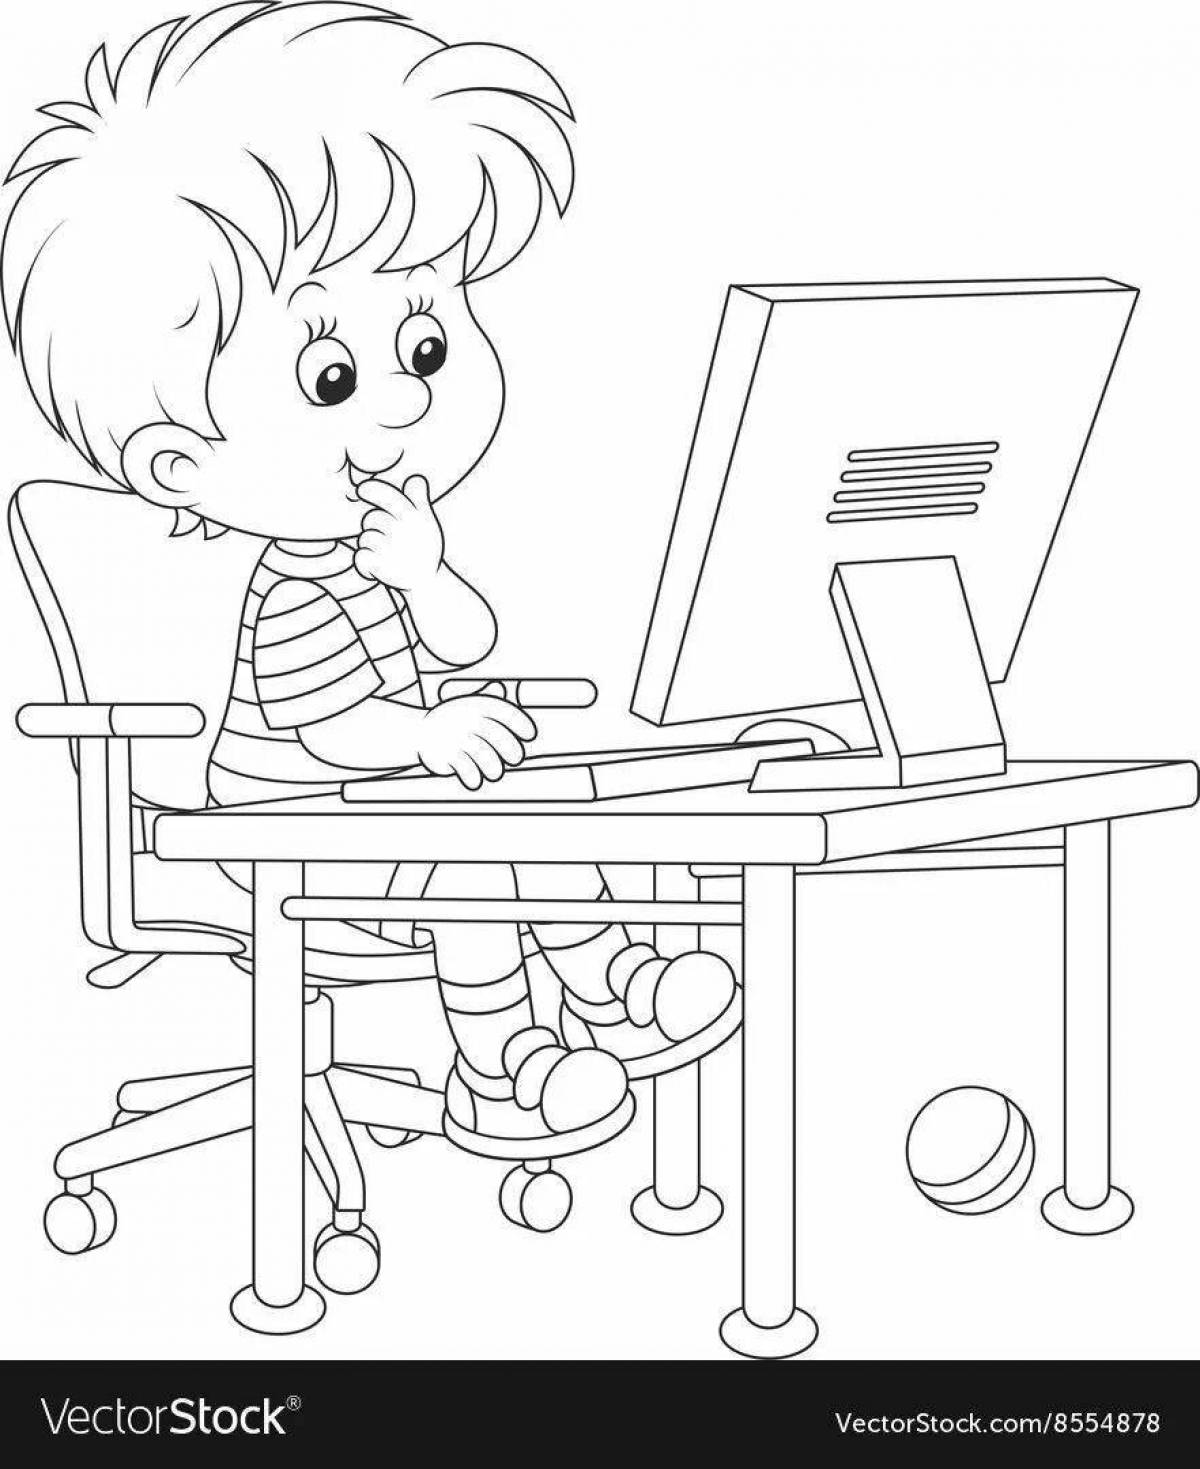 Coloring bright child and computer